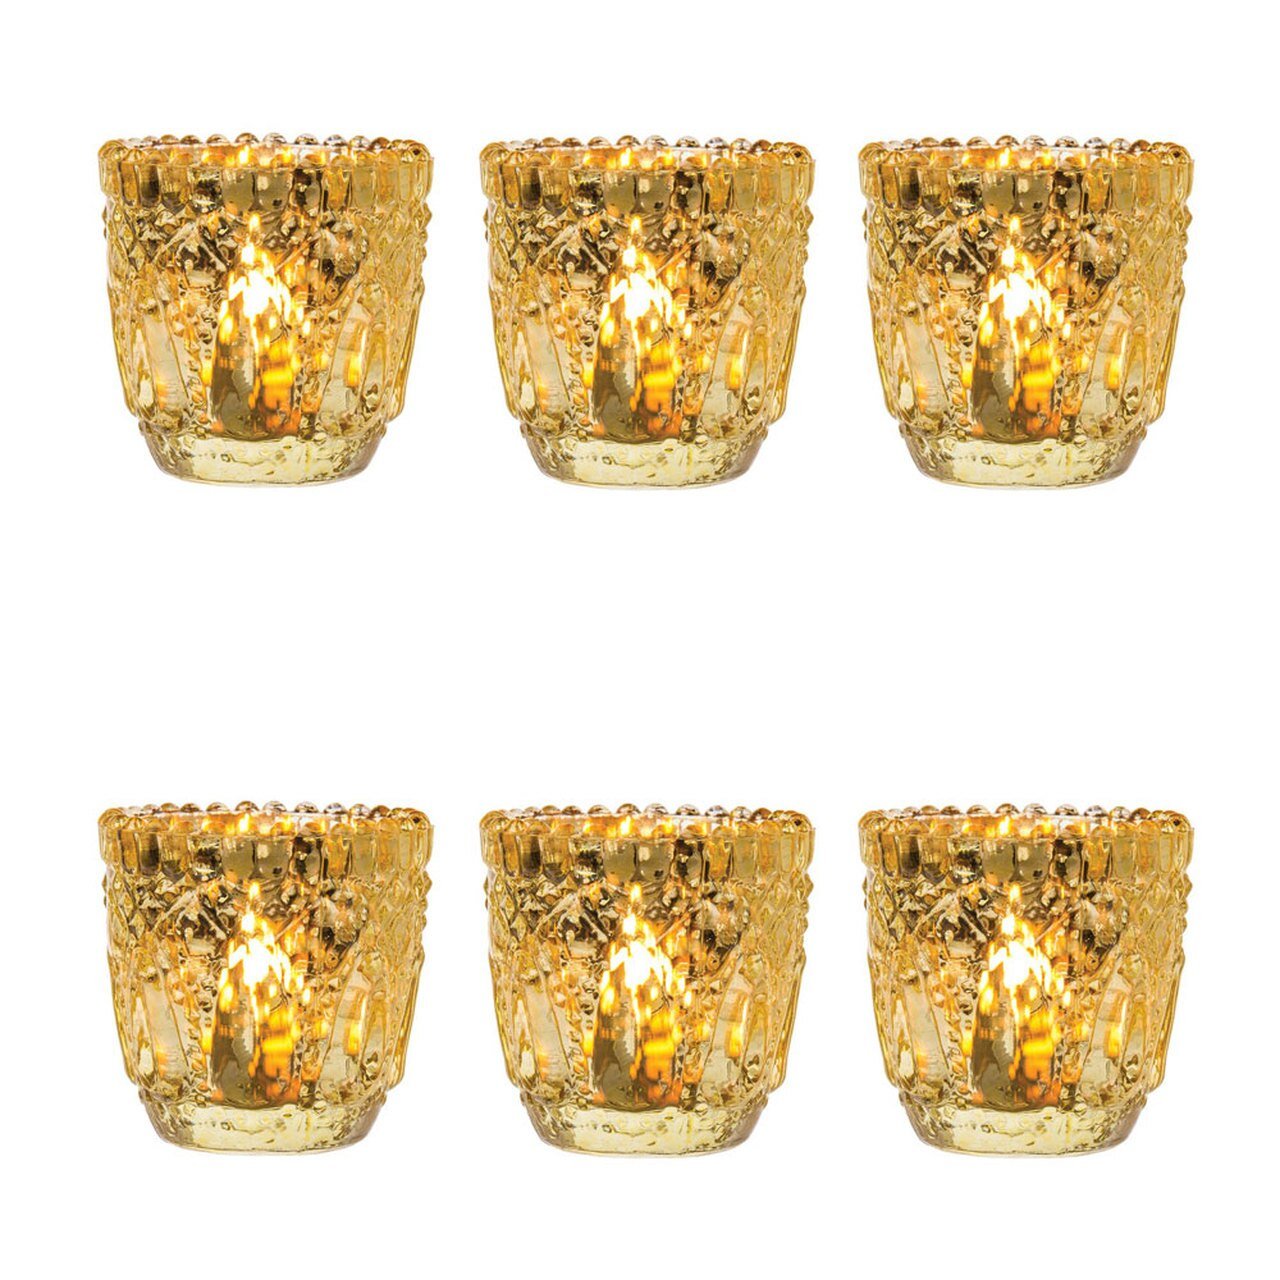 6 Pack | Faceted Vintage Mercury Glass Candle Holders (2.75-Inch, Lillian Design, Gold) - Use with Tea Lights - For Home Decor, Parties and Wedding Decorations - AsianImportStore.com - B2B Wholesale Lighting & Decor since 2002